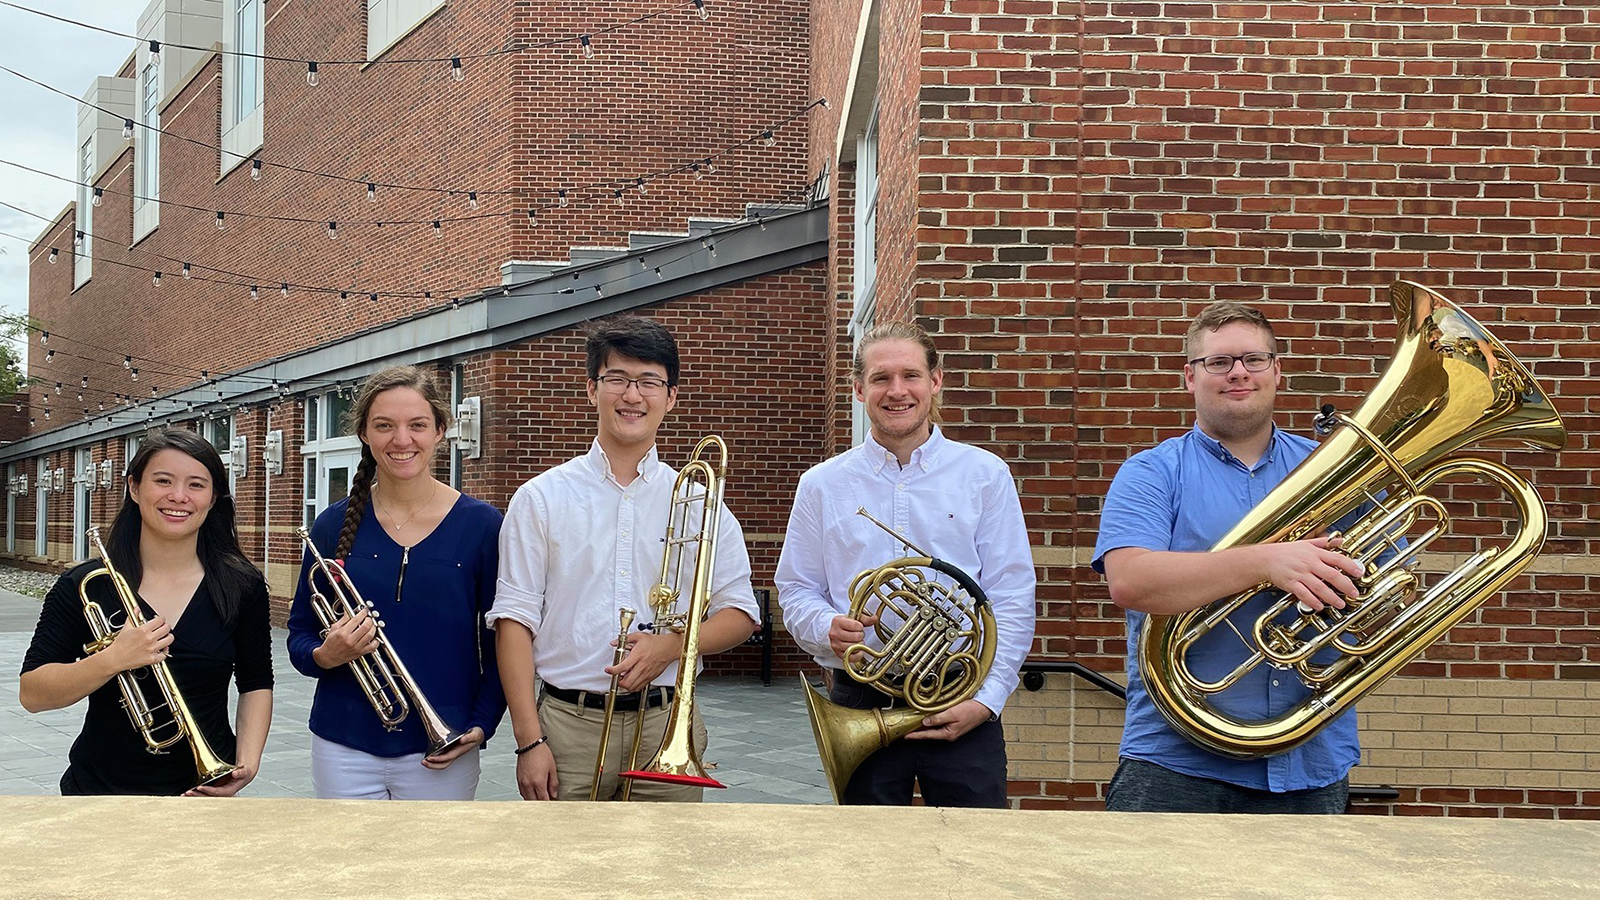  The five members of the inaugural UMD Terrapin Brass ensemble standing outside The Clarice in a courtyard holding their brass instruments while smiling.